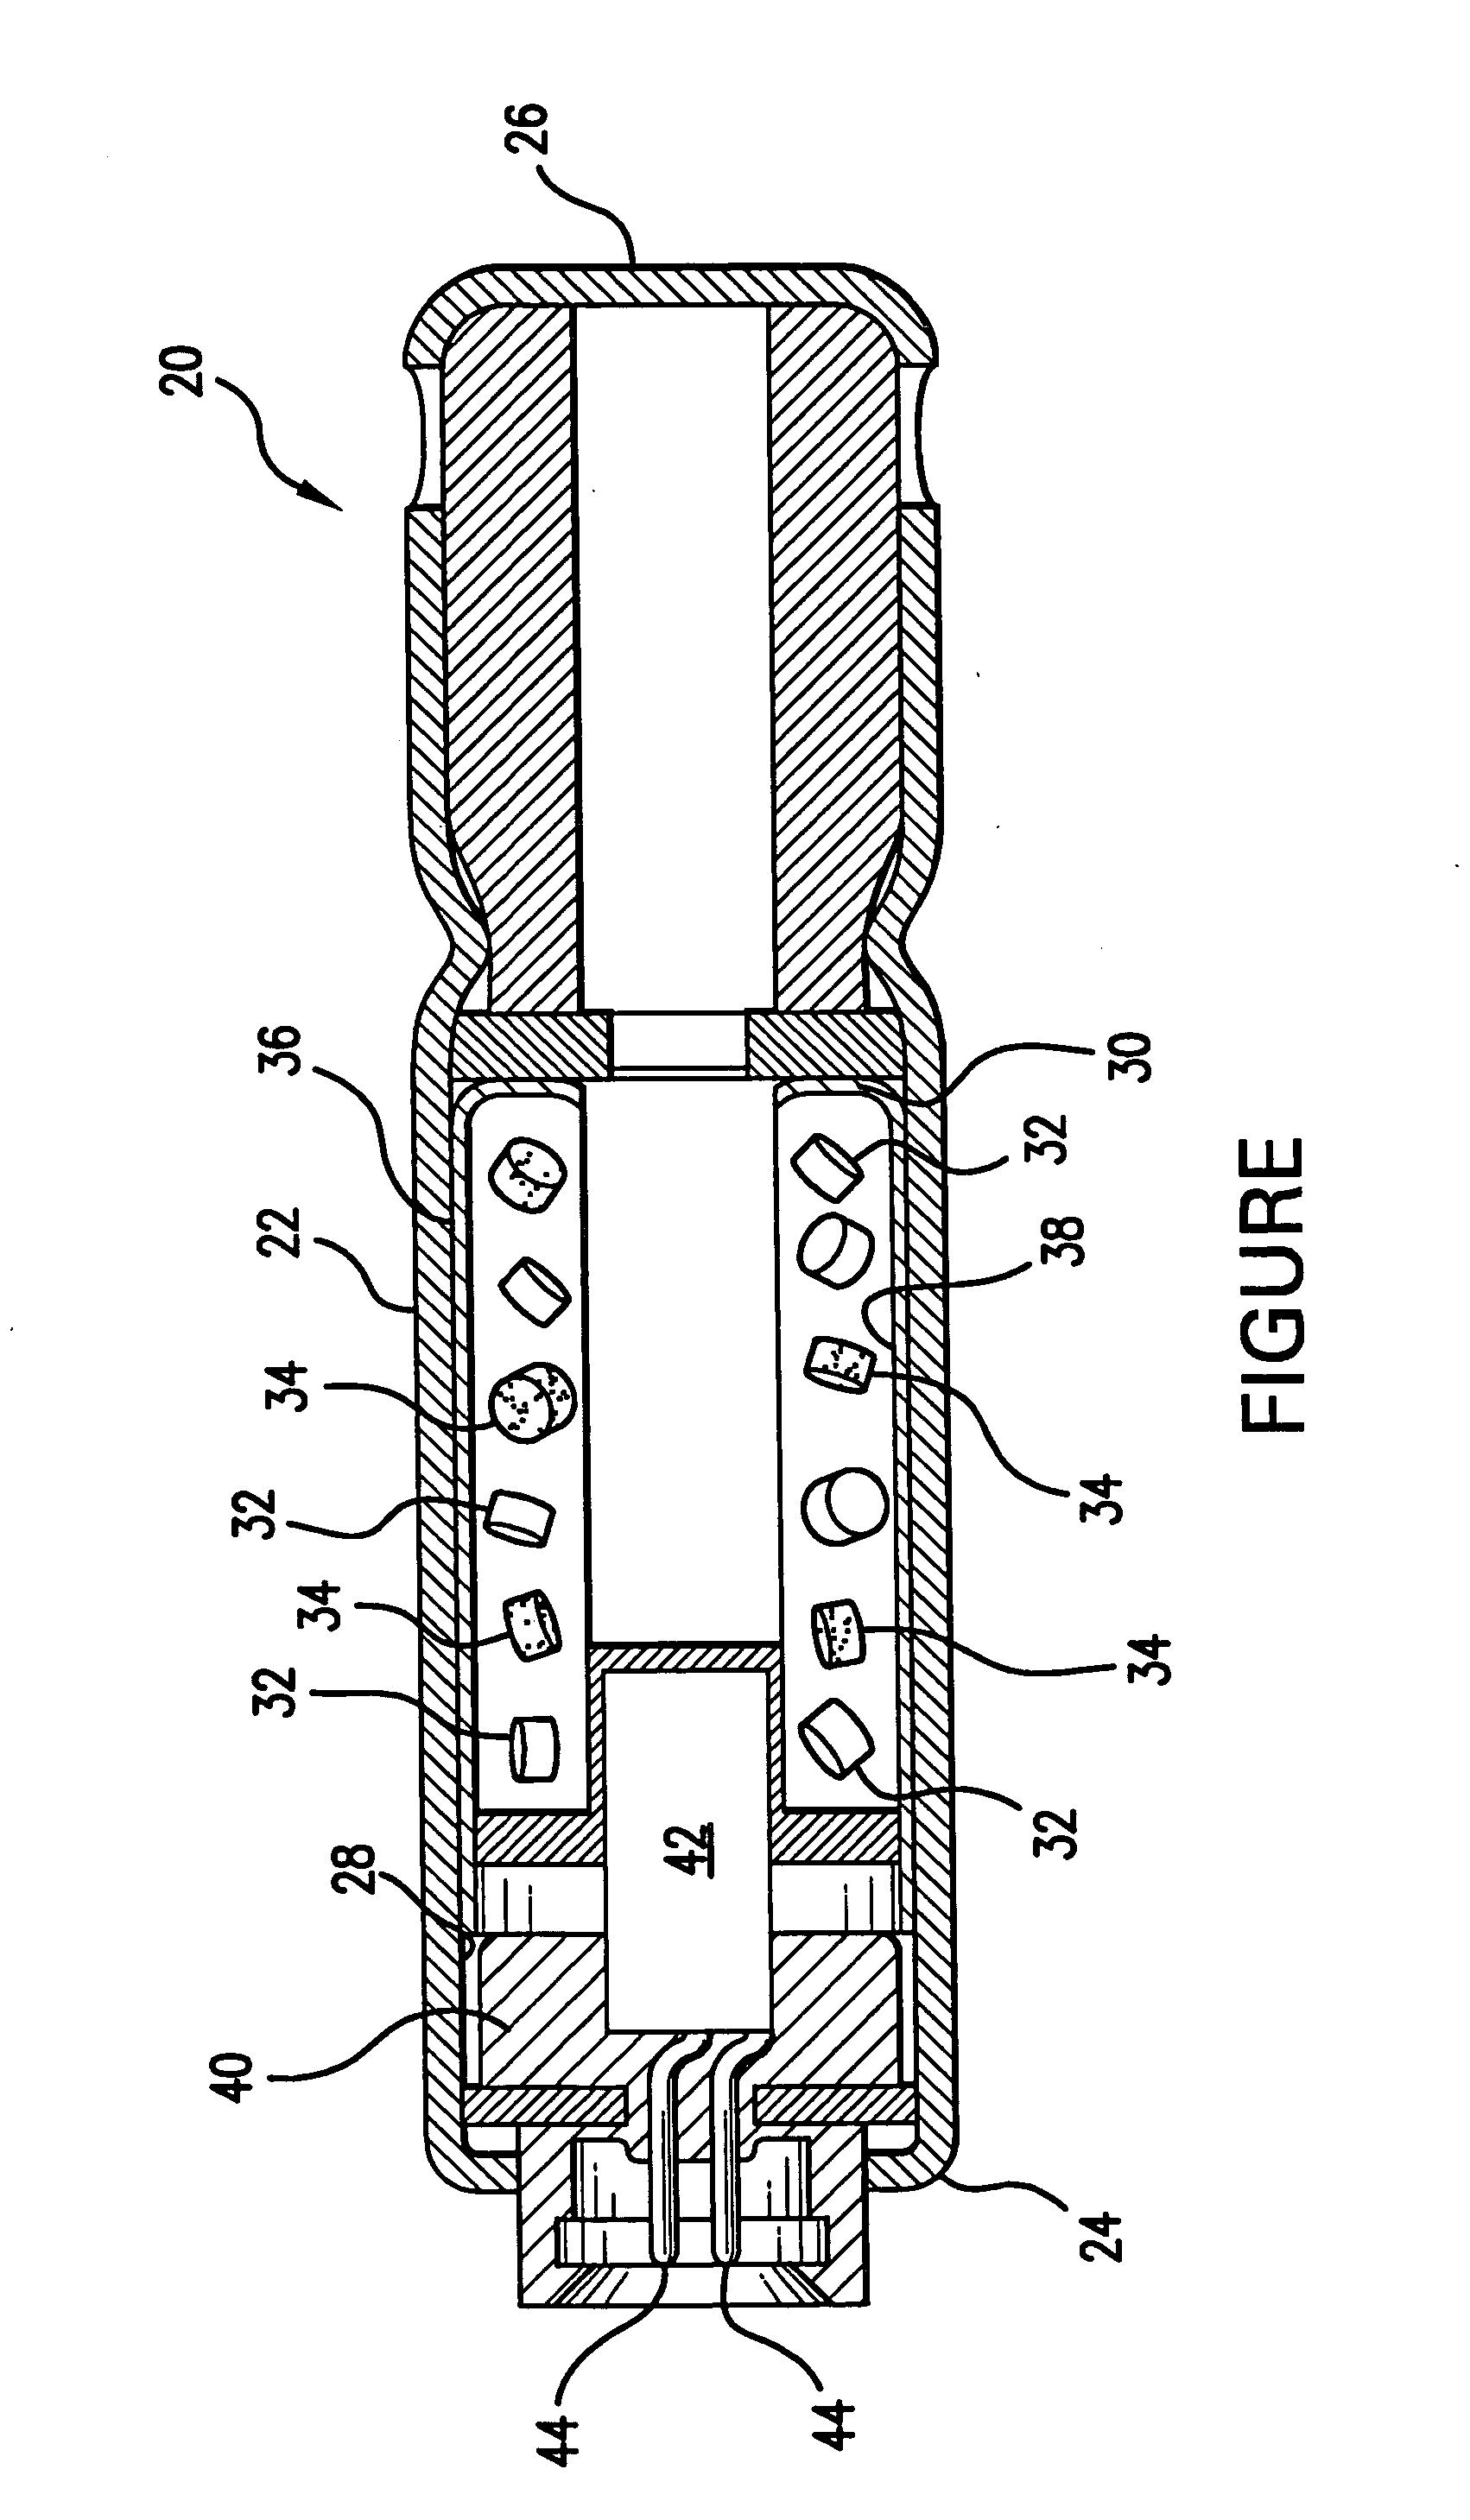 Autoignition material and method